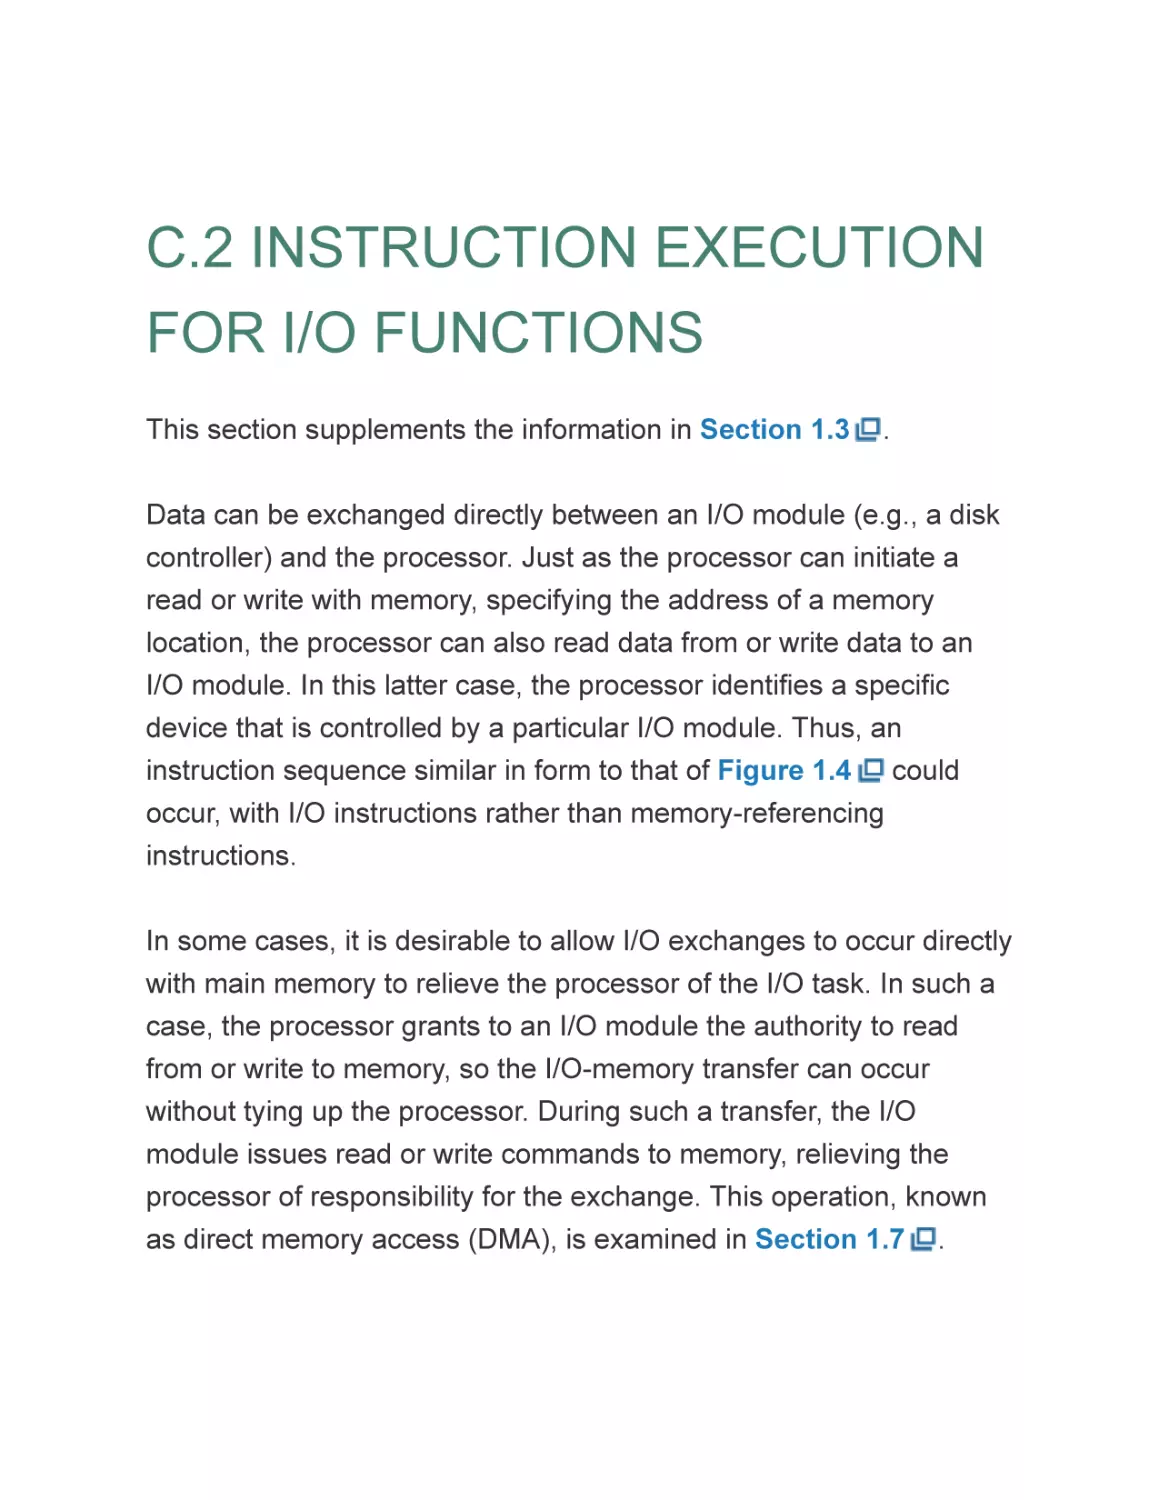 C.2 INSTRUCTION EXECUTION FOR I/O FUNCTIONS